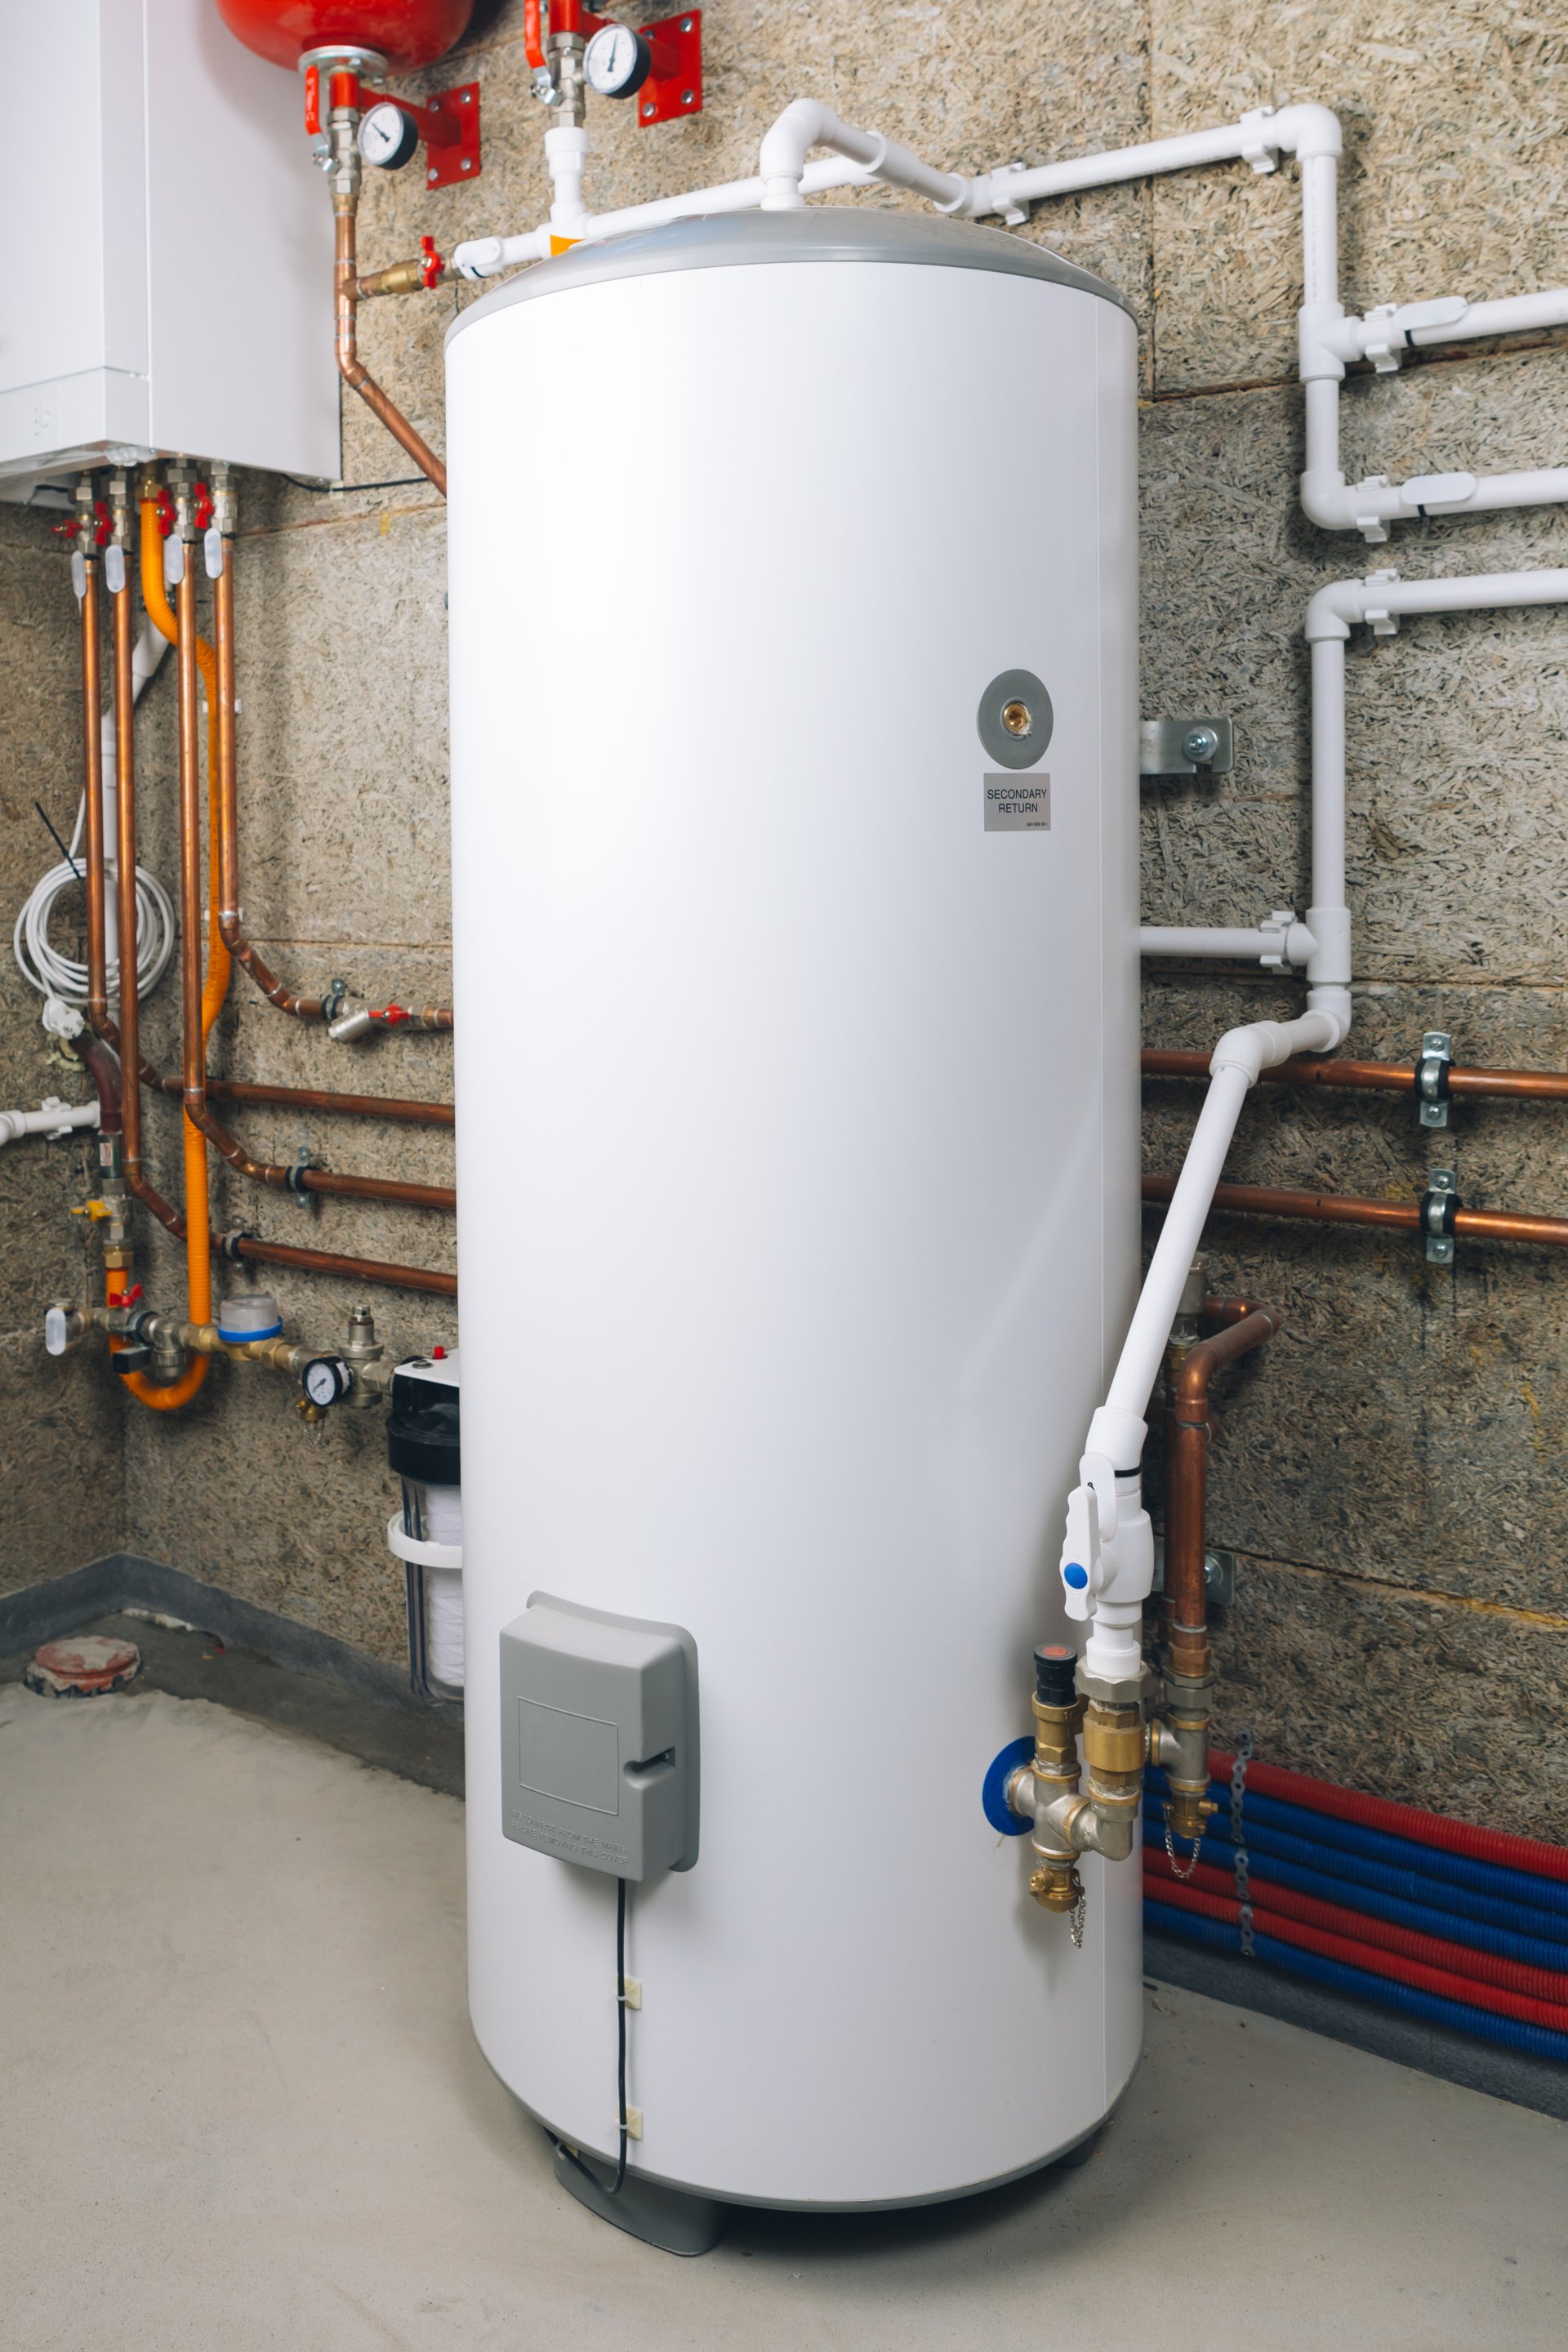 4 Common Water Heater Problems